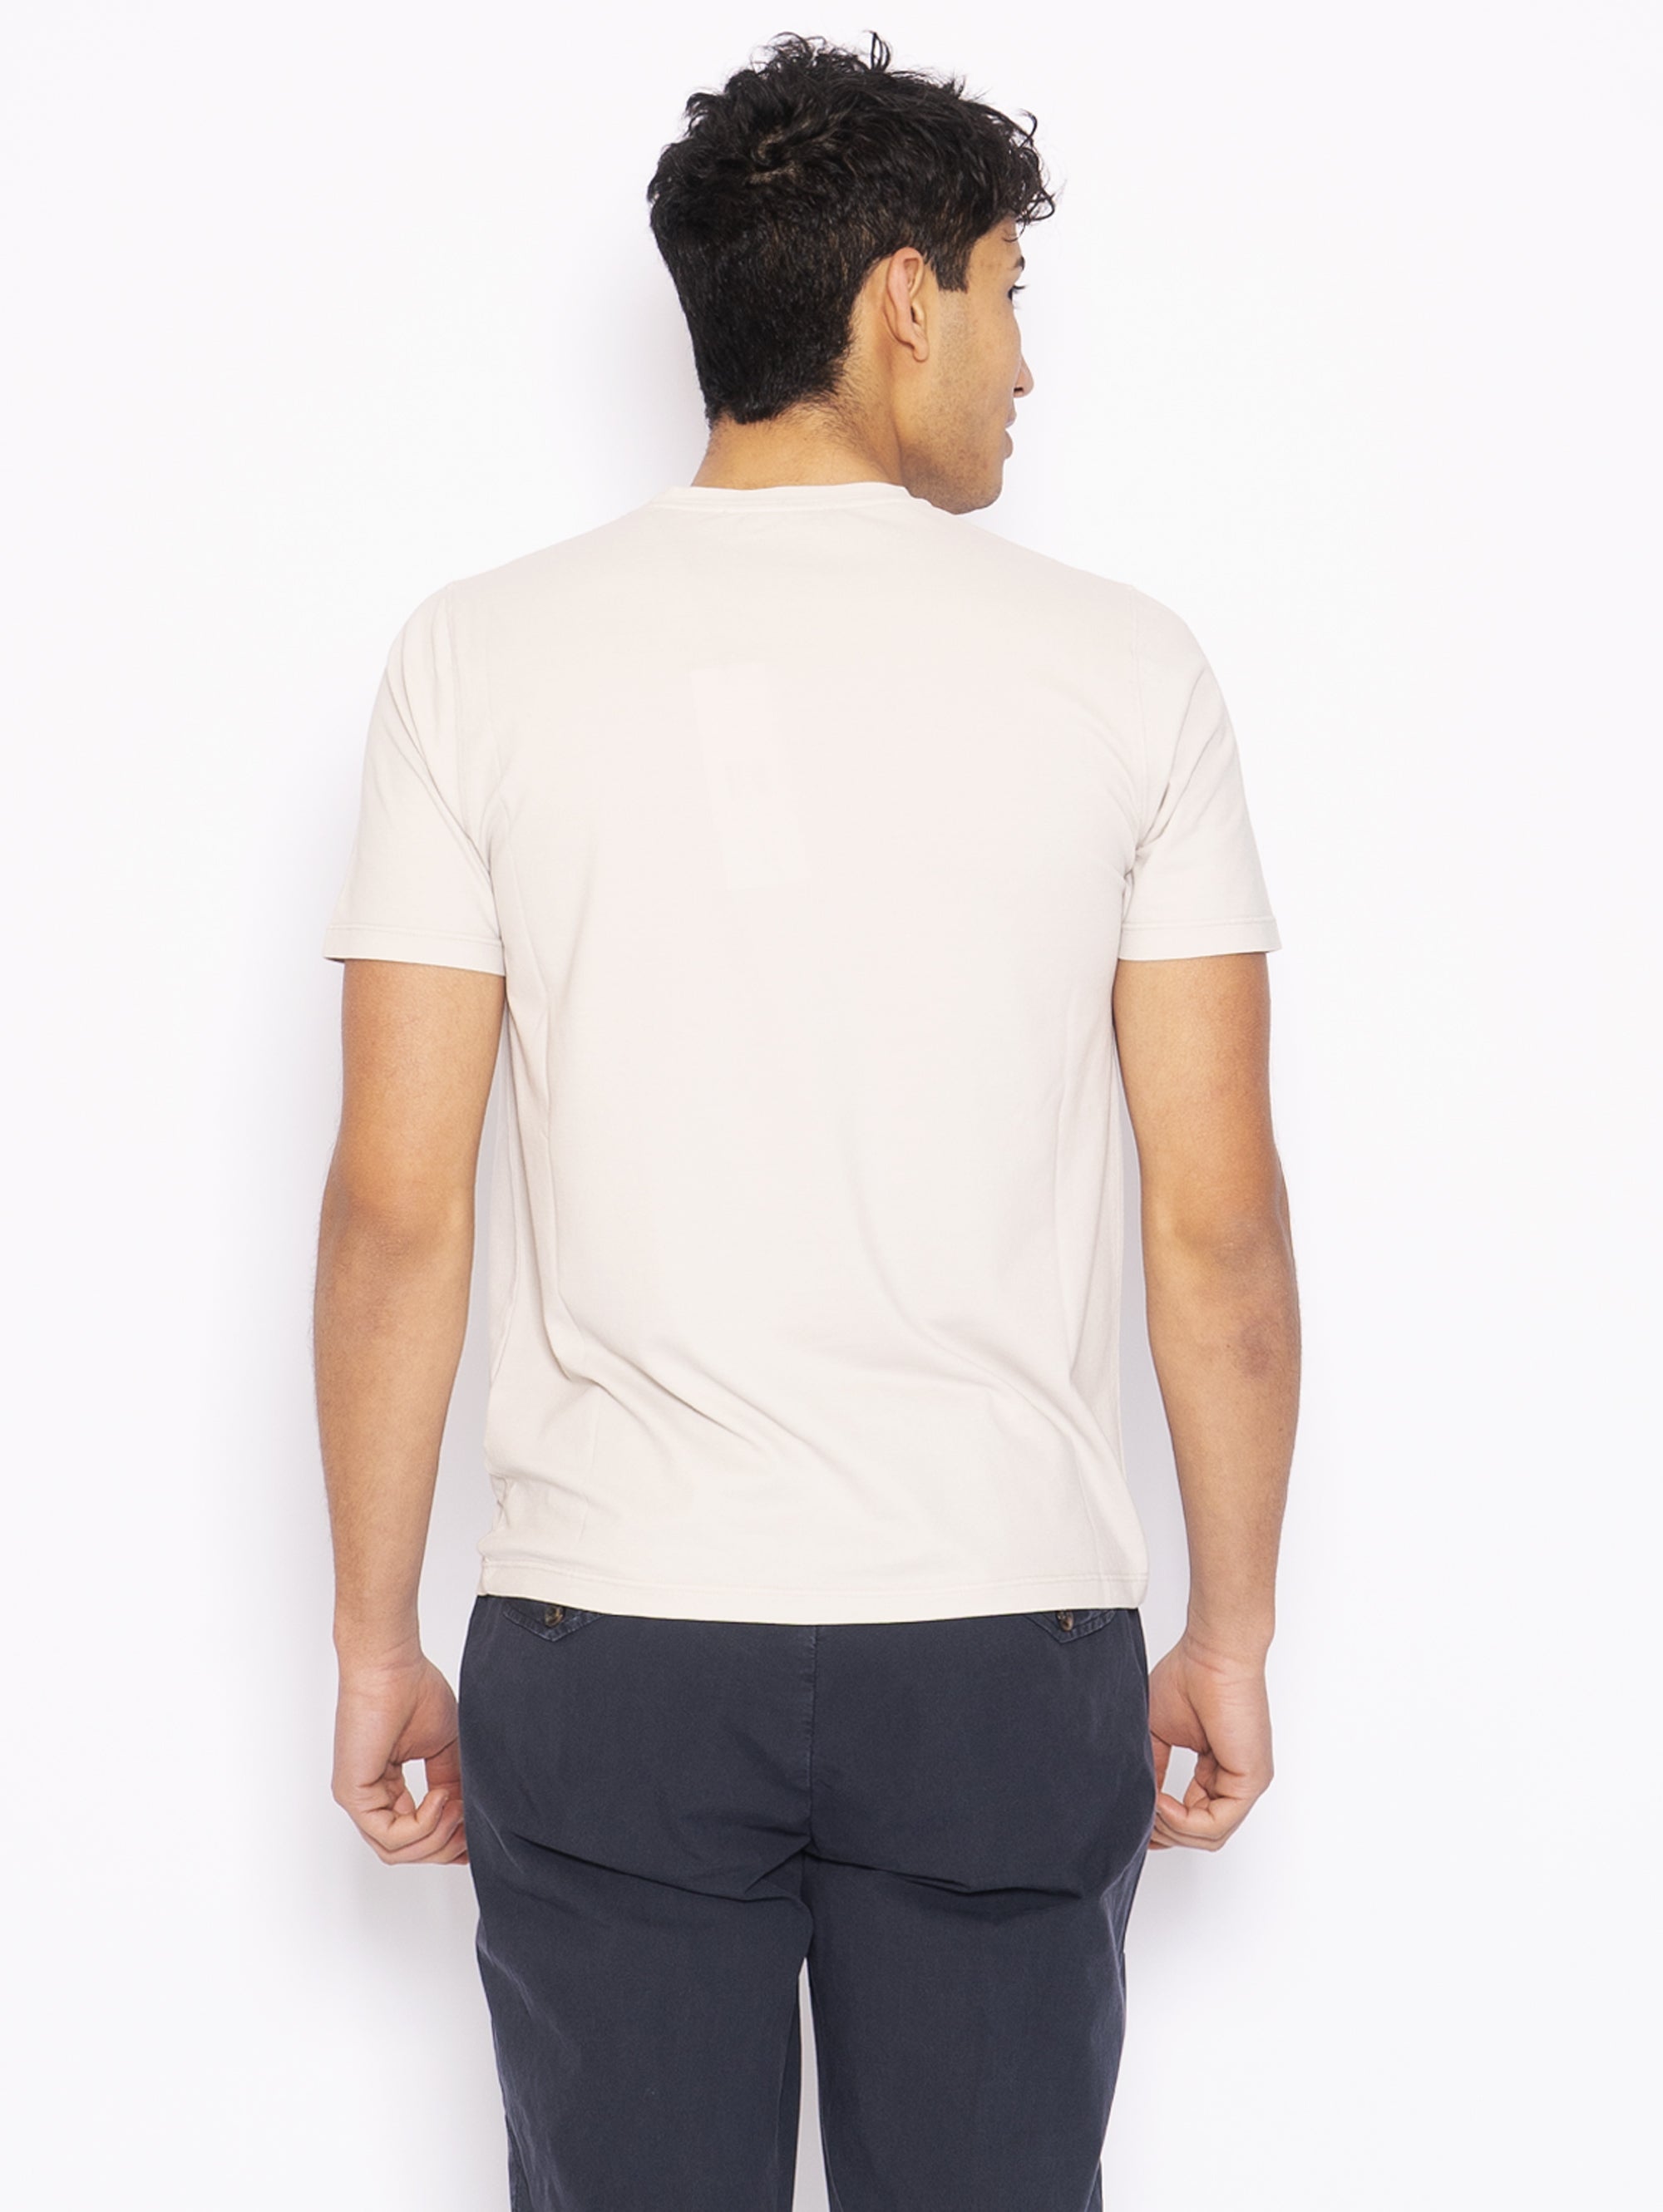 T-shirt in Ice Cotton Sasso